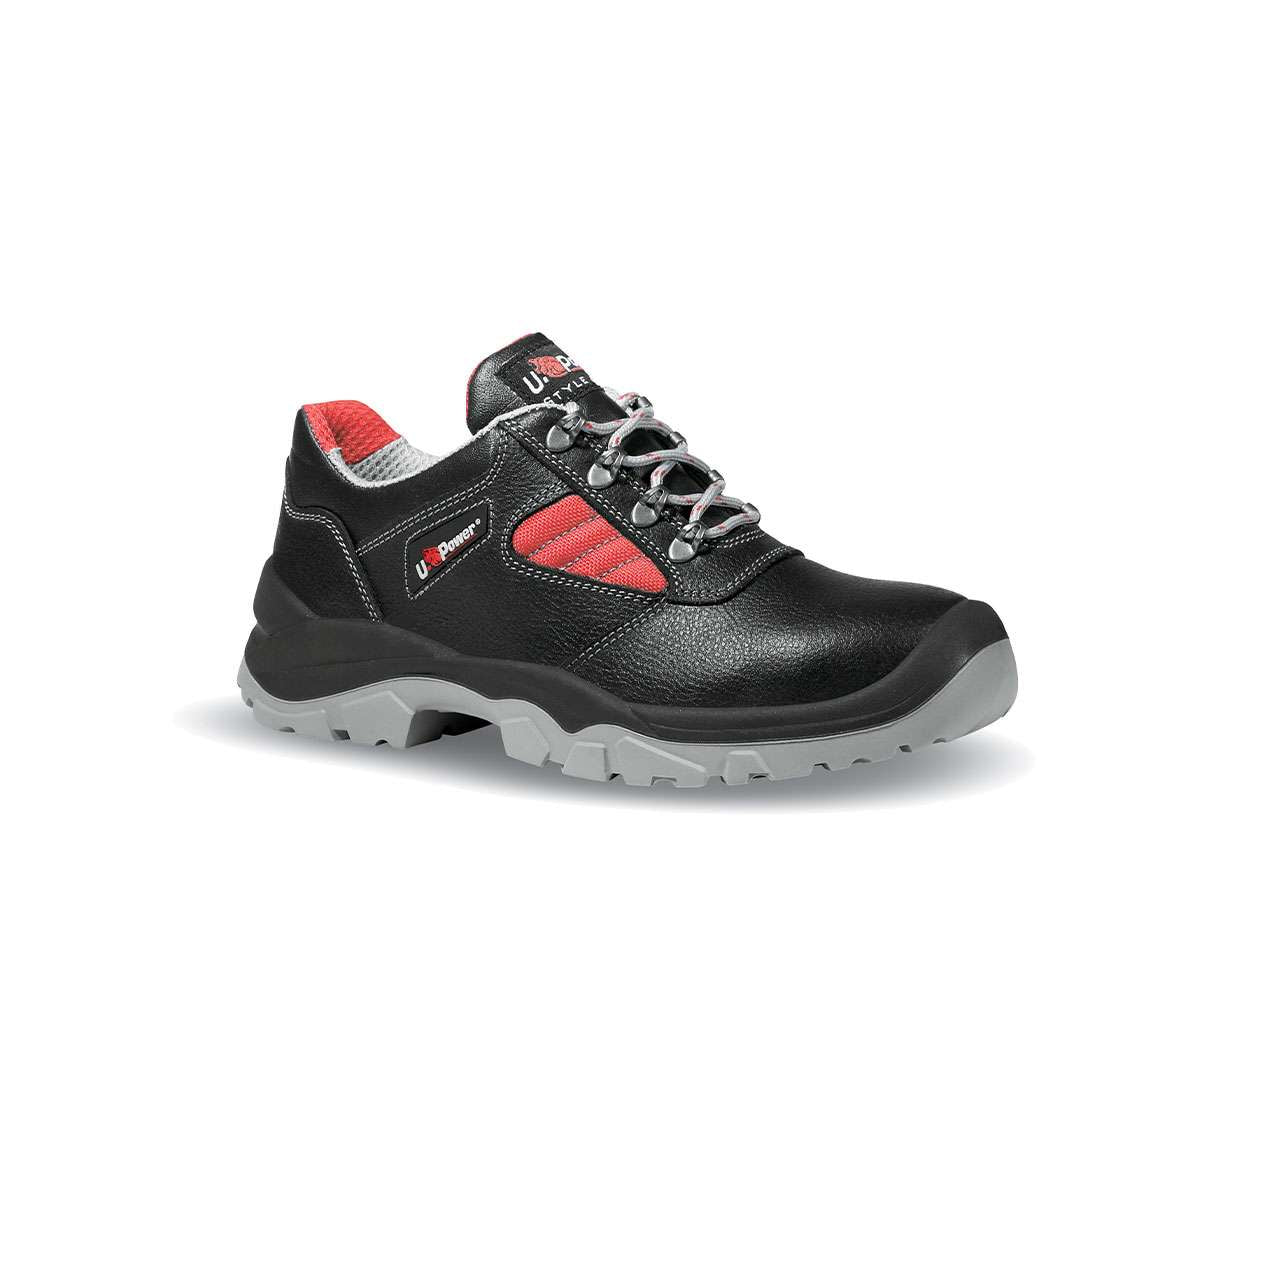 Low Safety Shoes, classic and strong - U-Power Mauna S3 SRC